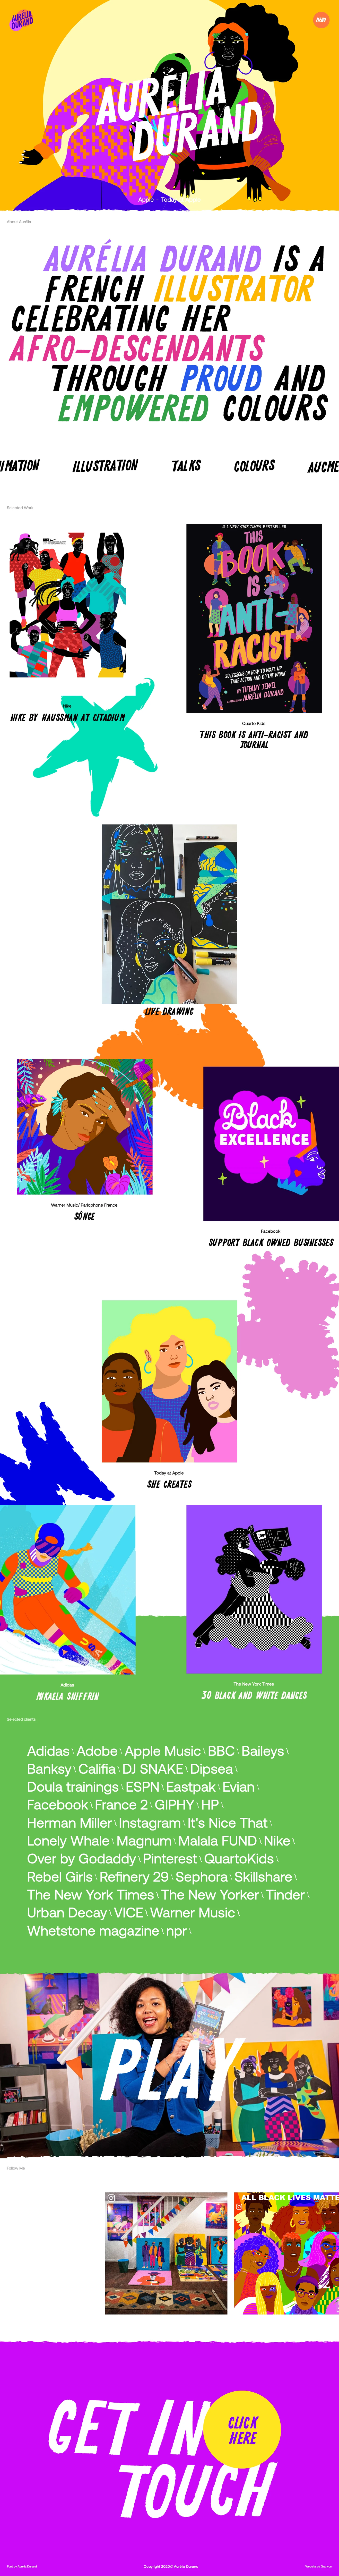 Aurélia Durand Landing Page Example: Aurélia Durand is a French Illustrator celebrating her Afro-descendants through proud and empowered colours. Aurélia Durand's art is a vivid celebration of diversity. She dedicates her artistic voice to matters involving representation.